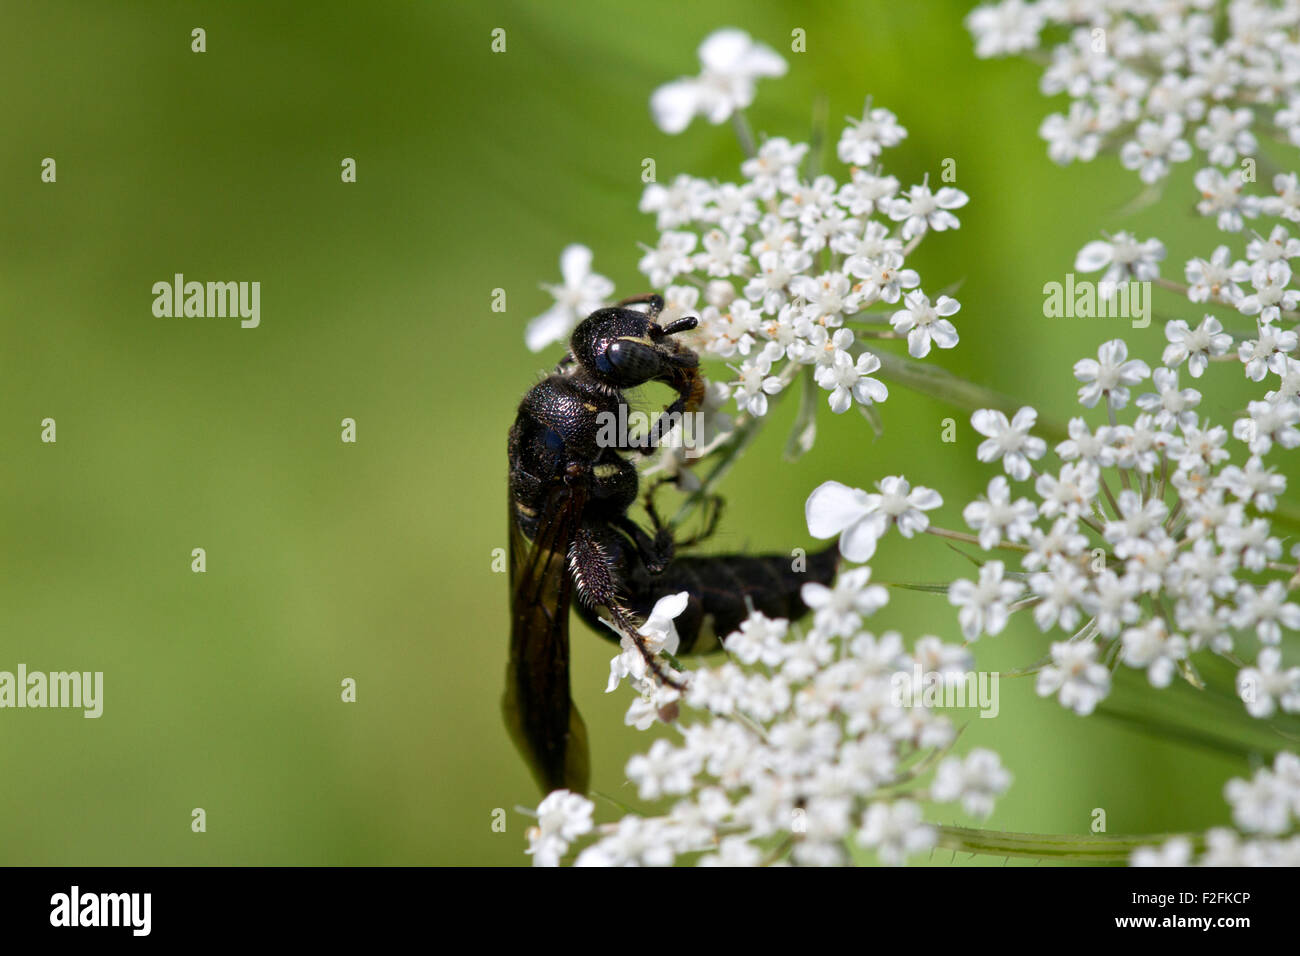 Wasp (Myzinum sp.) and queen Anne's lace flower. Stock Photo